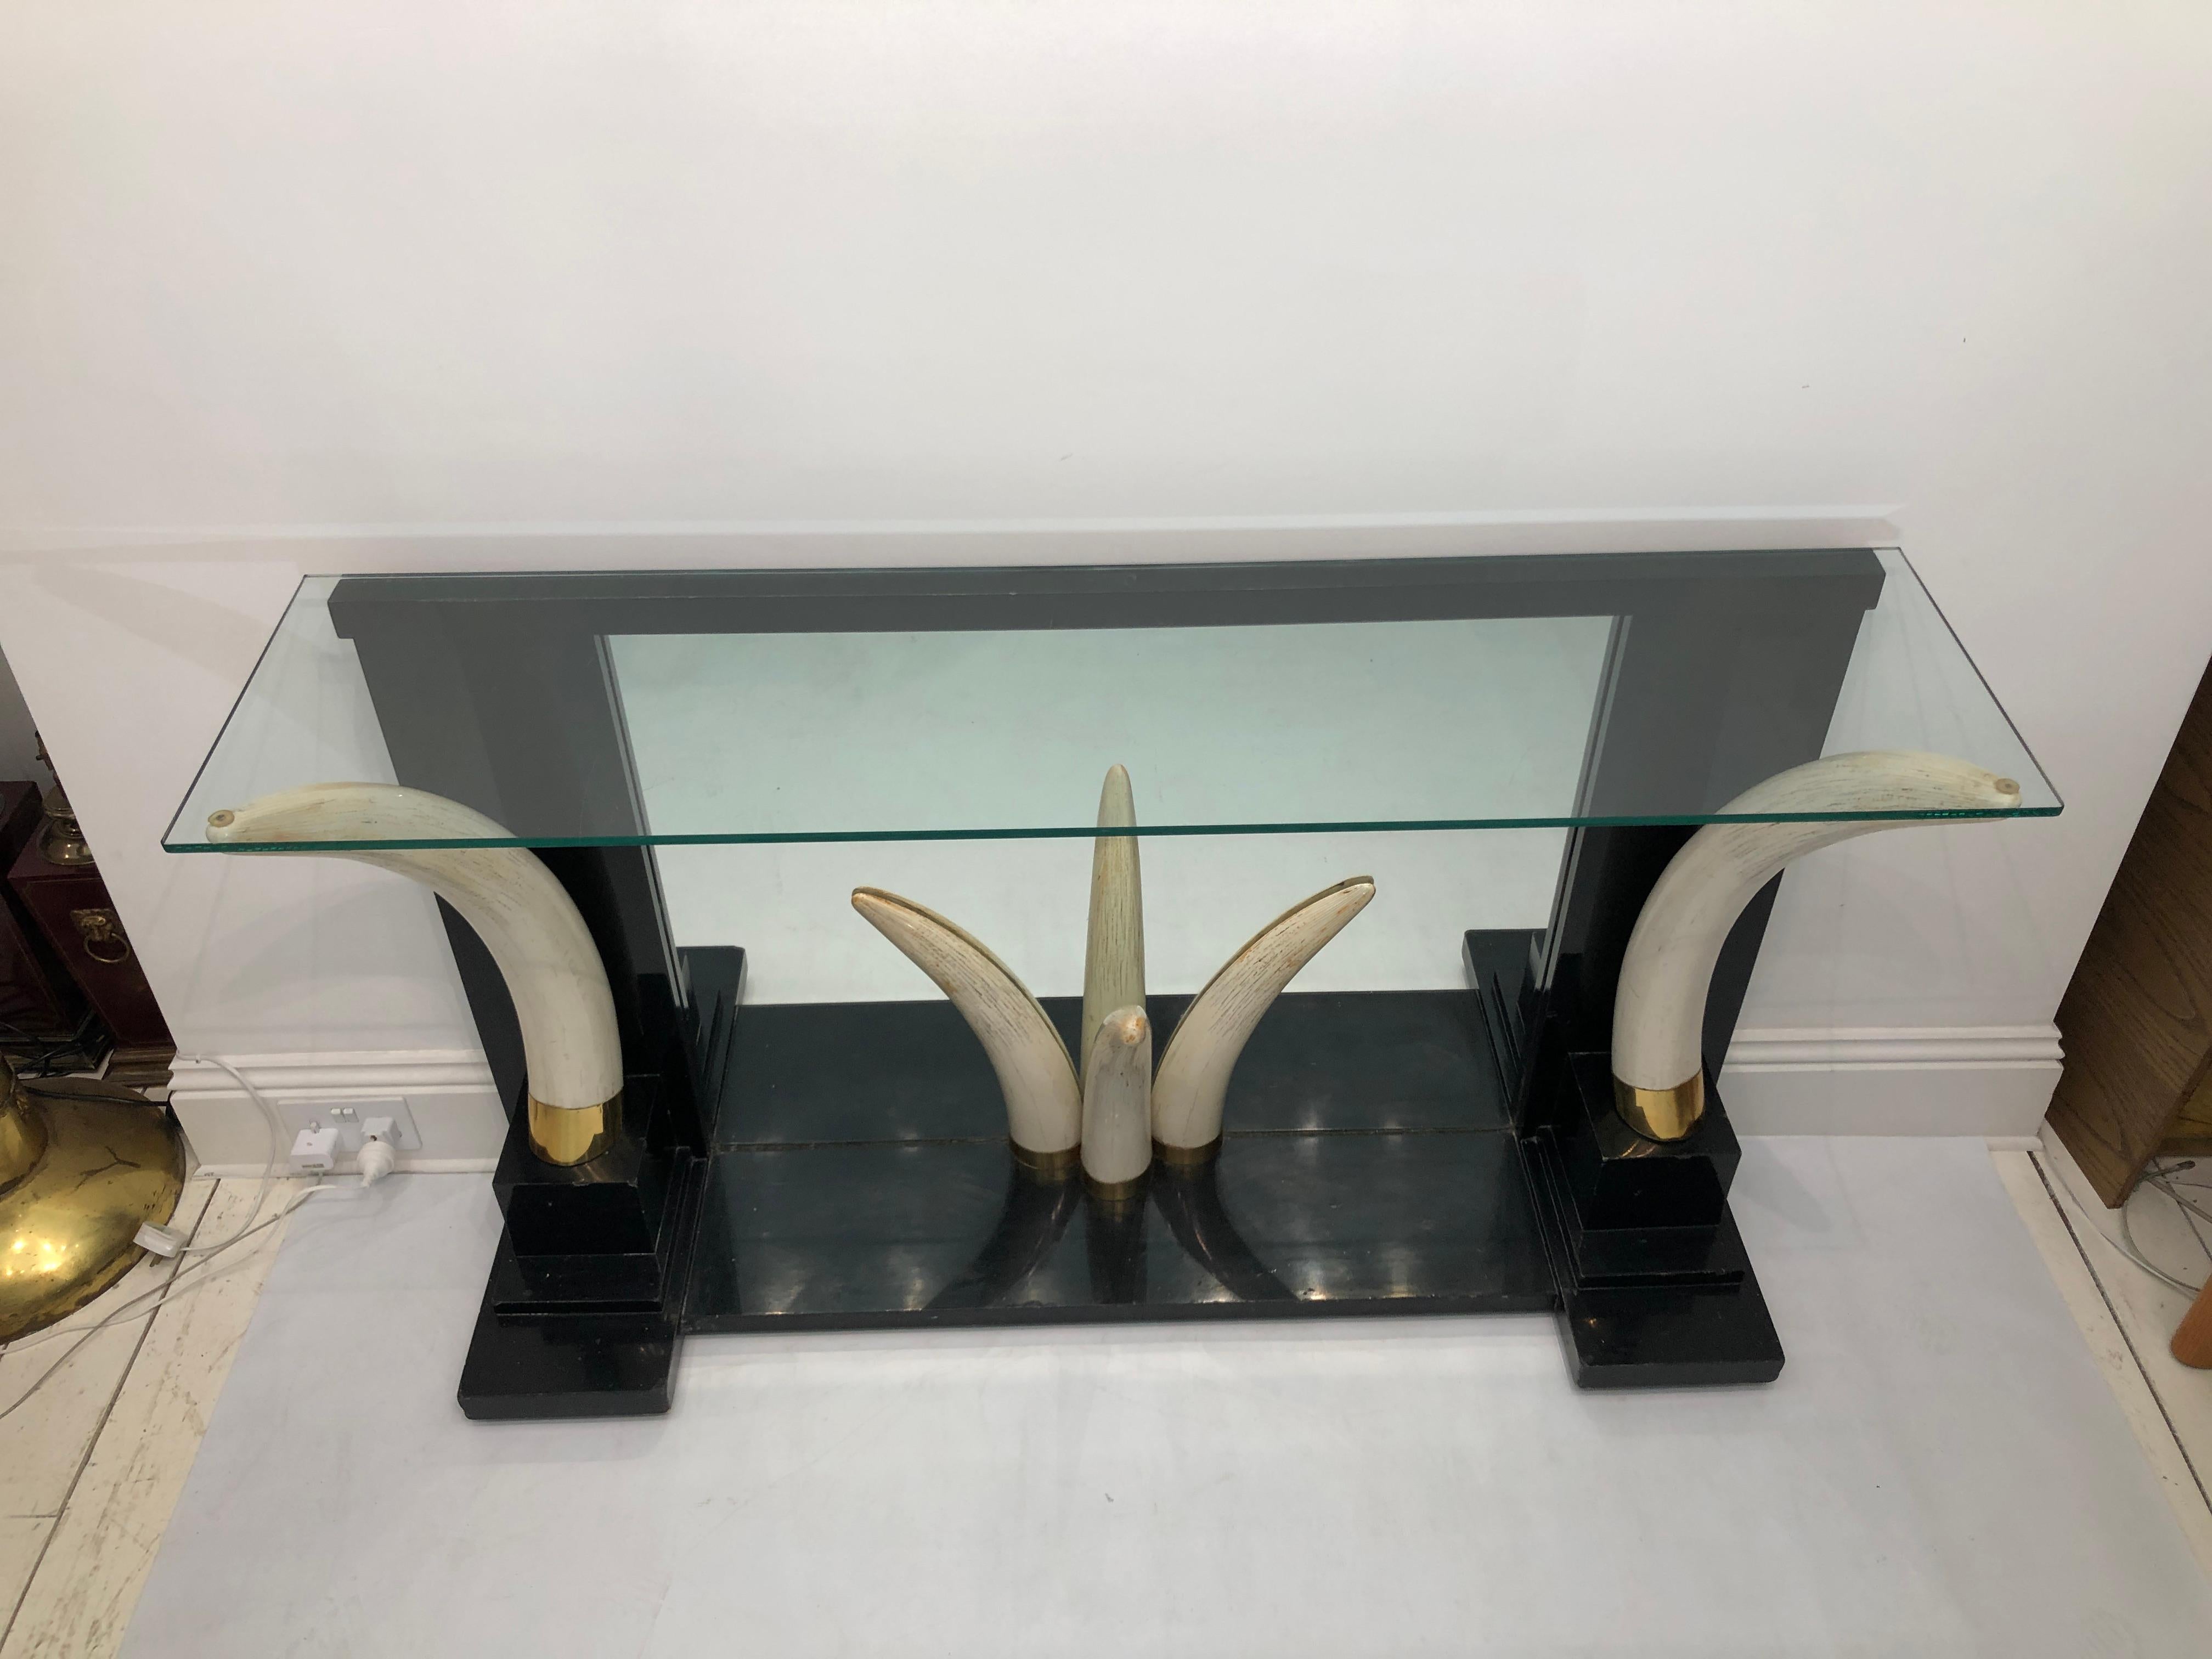 An exceptional and striking console table by the Versailles Collection possibly designed by Suzanne Dahl and Jerry Barich.

A pair of large faux elephant tusks in brass fitting stand atop an ebony pedestal base and flank a small trio a faux tusks